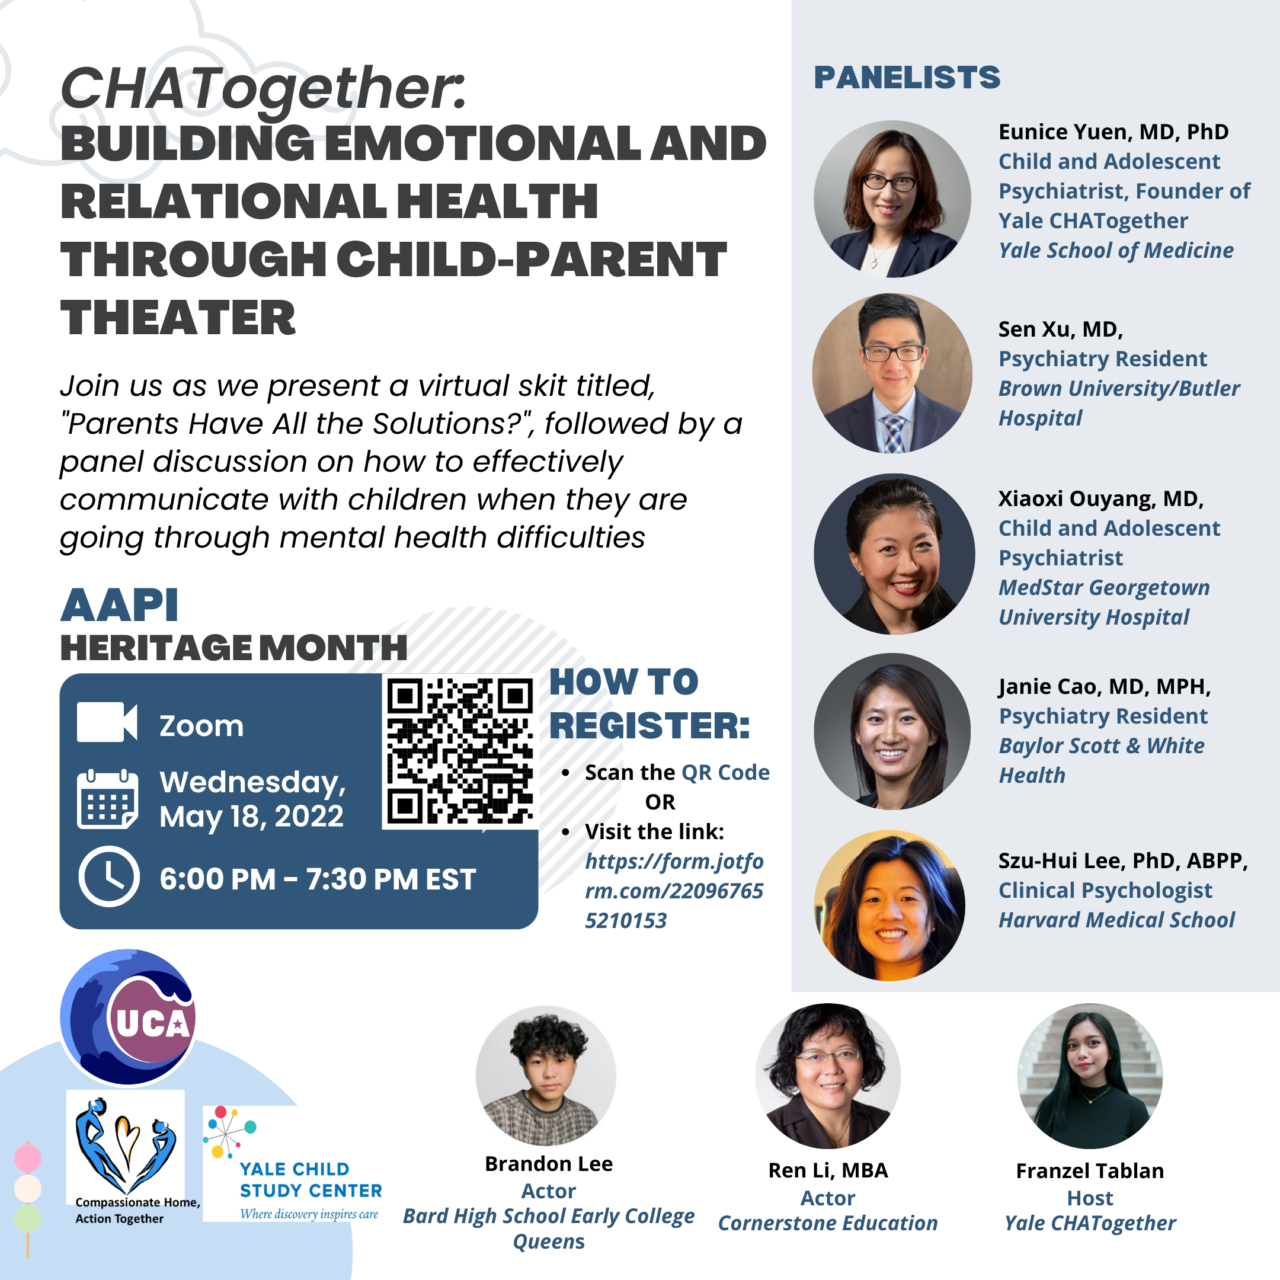 UCA WAVES and Yale CHATogether webinar: Building Emotional and Relational Health Through Child-Parent Theater